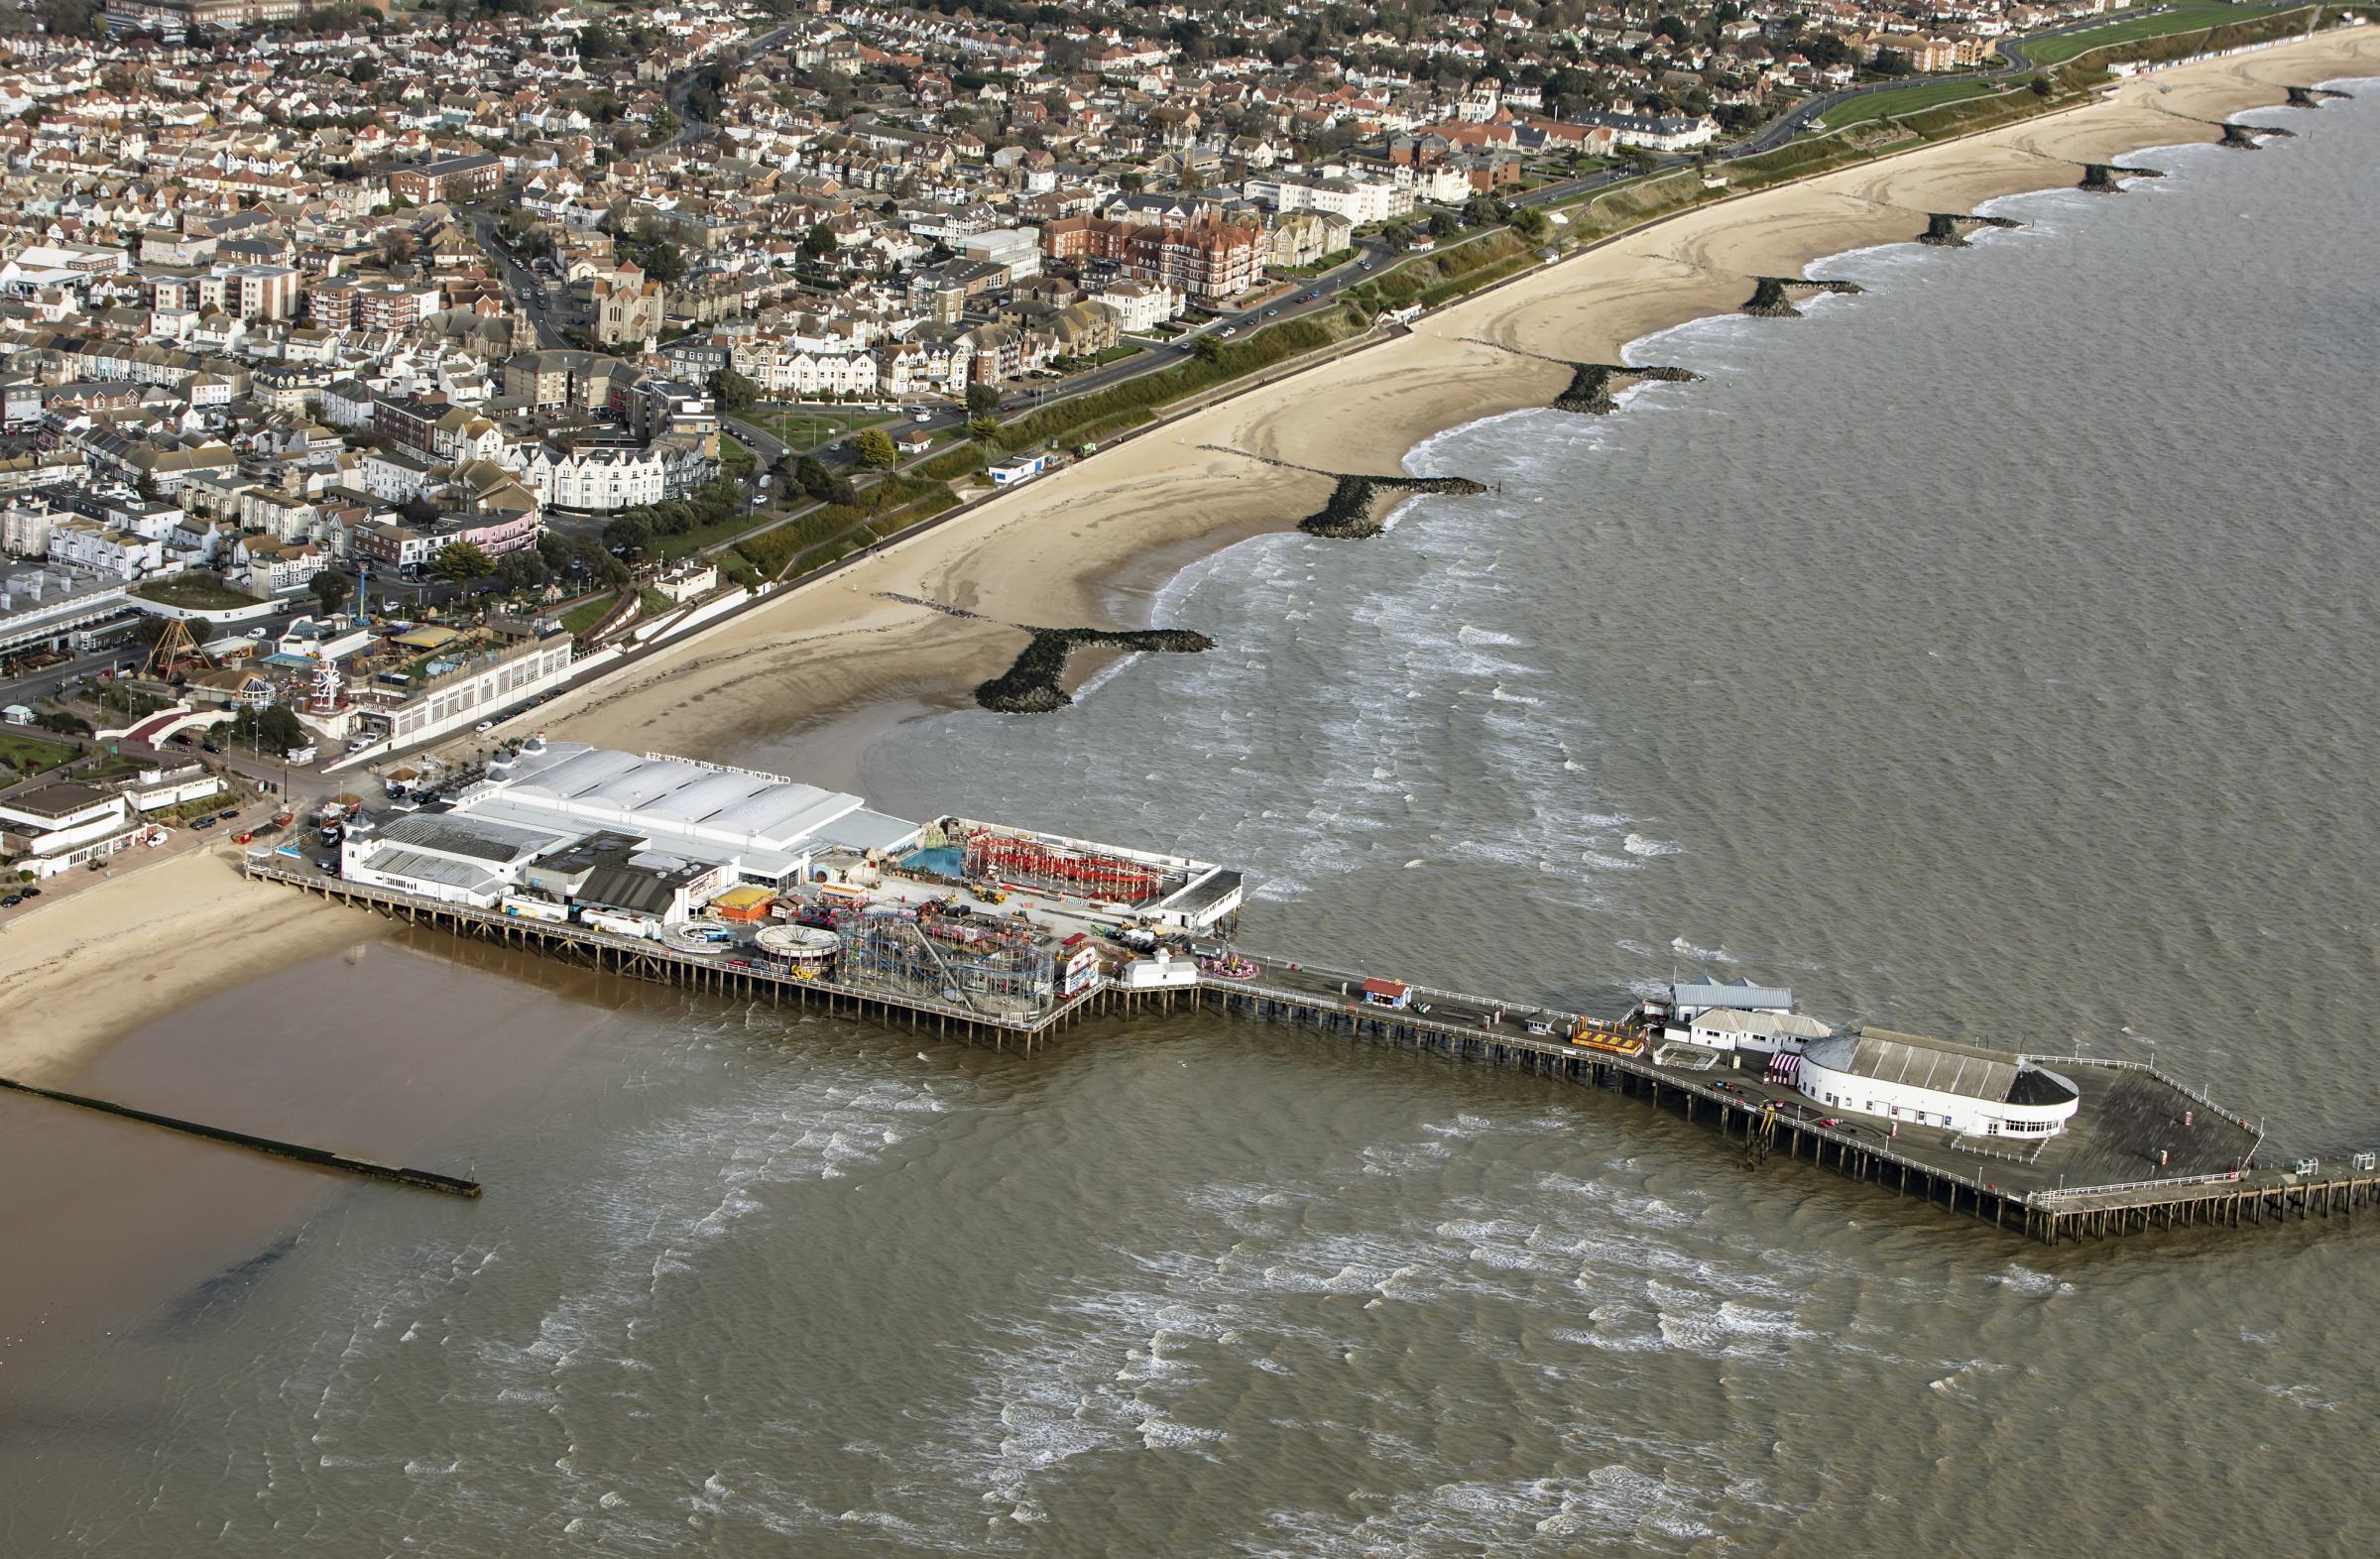 Clacton Pier from above